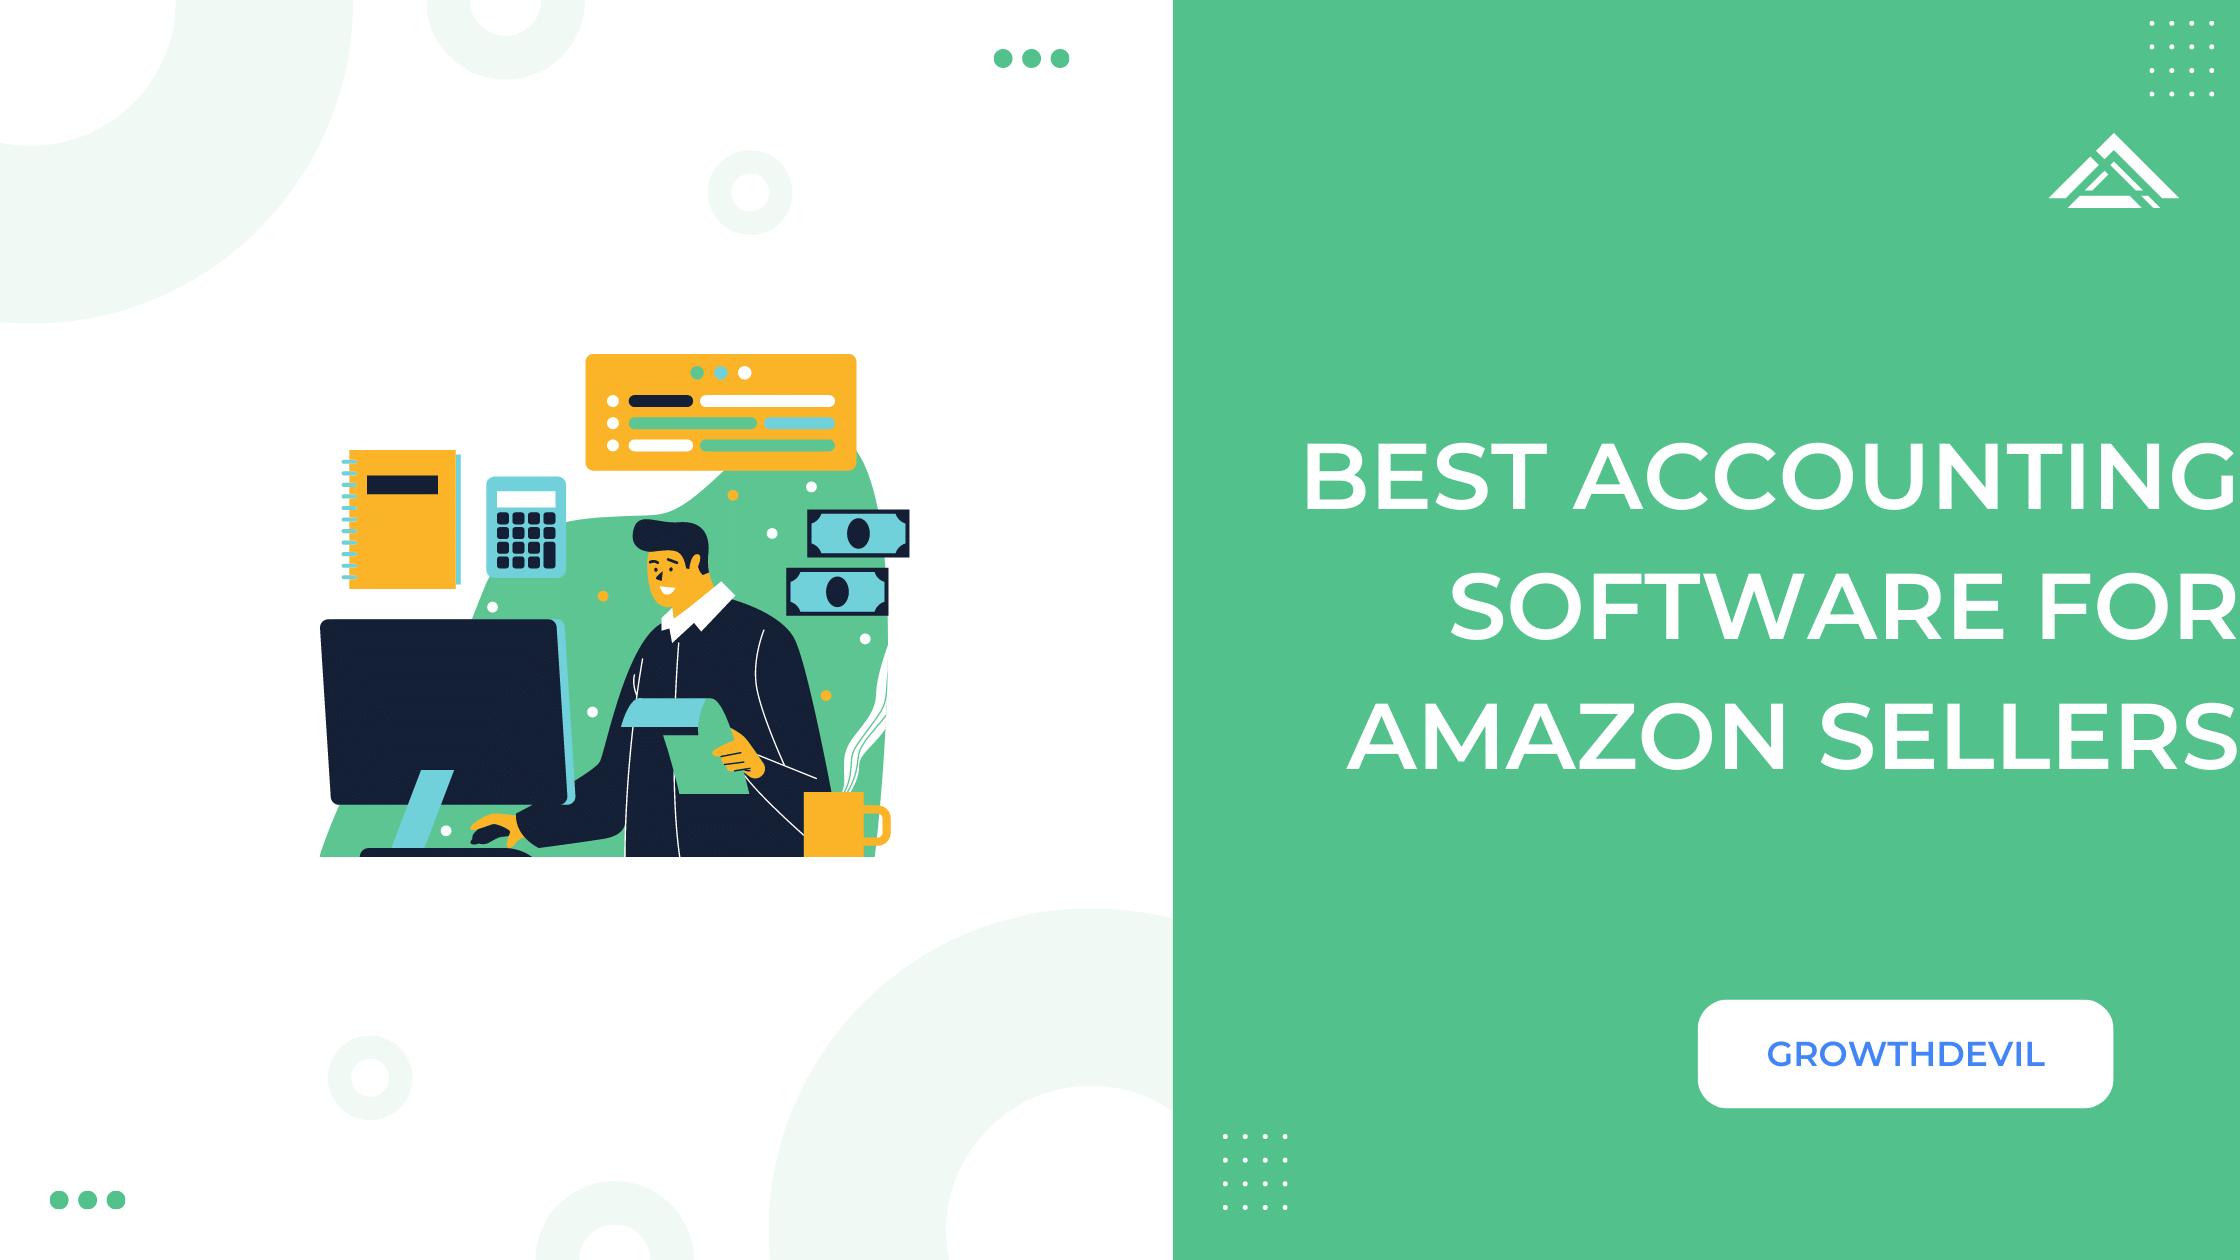 Best Accounting Software For Amazon Sellers - GrowthDevil